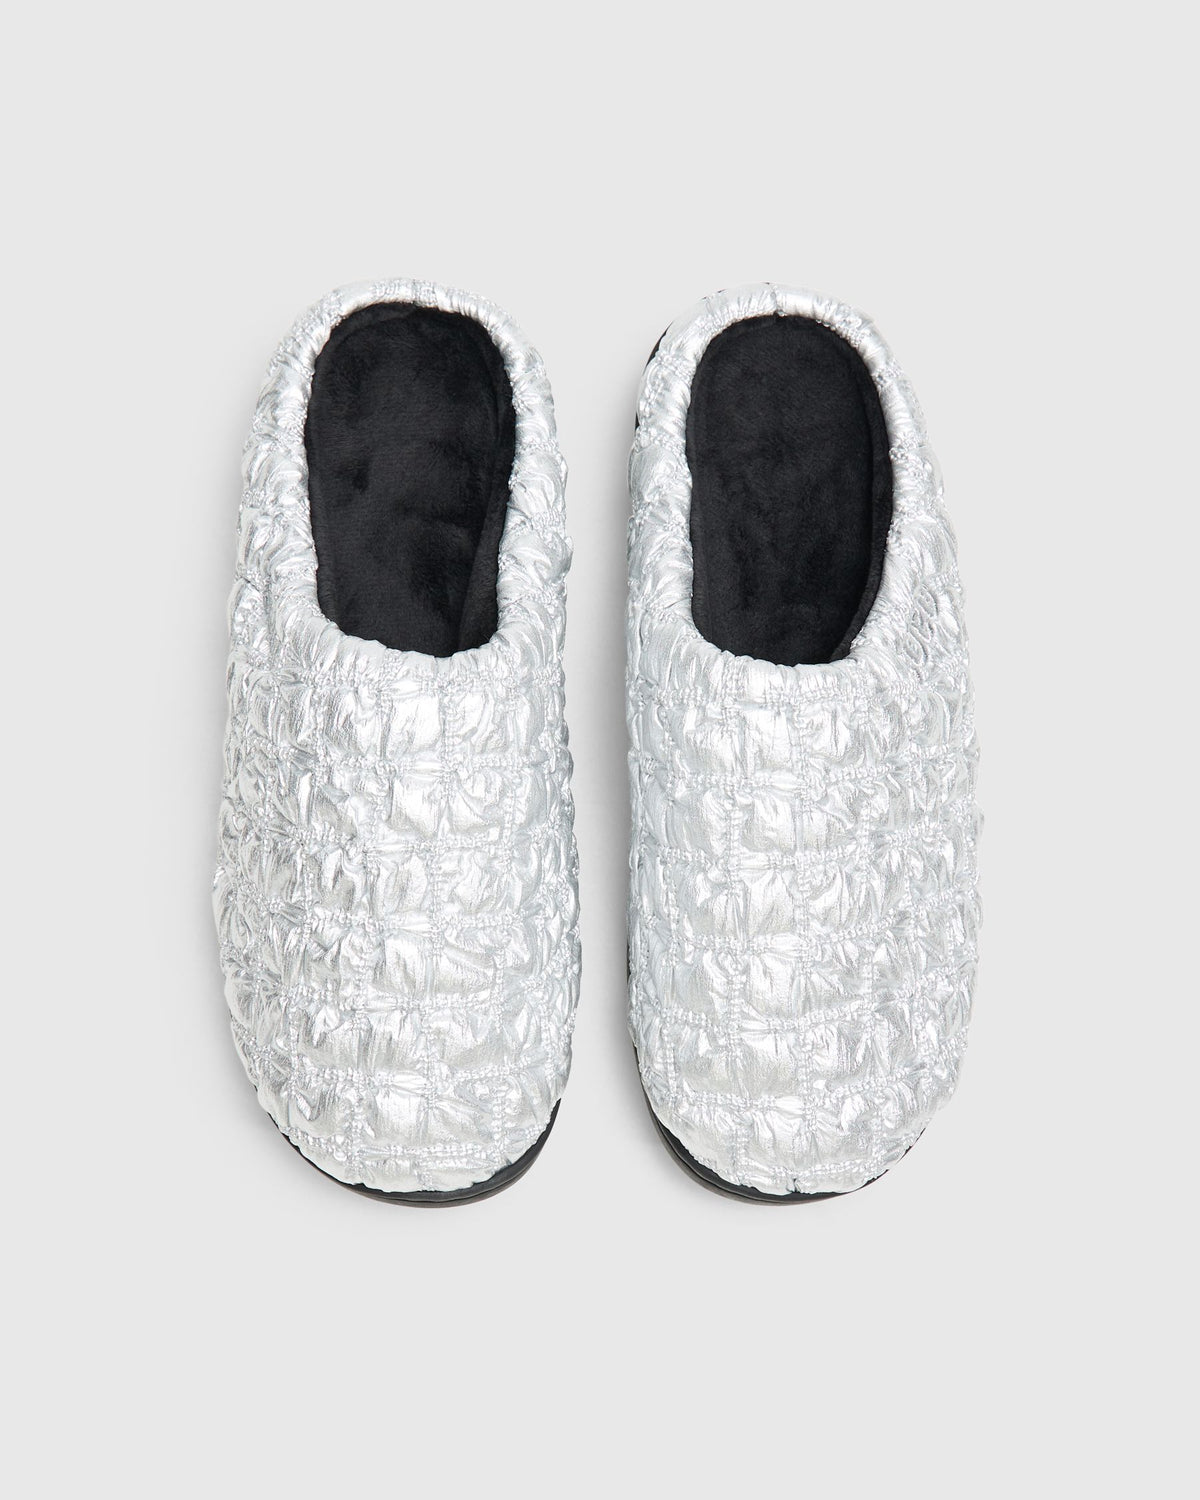 Subu Slippers in Bumpy Silver